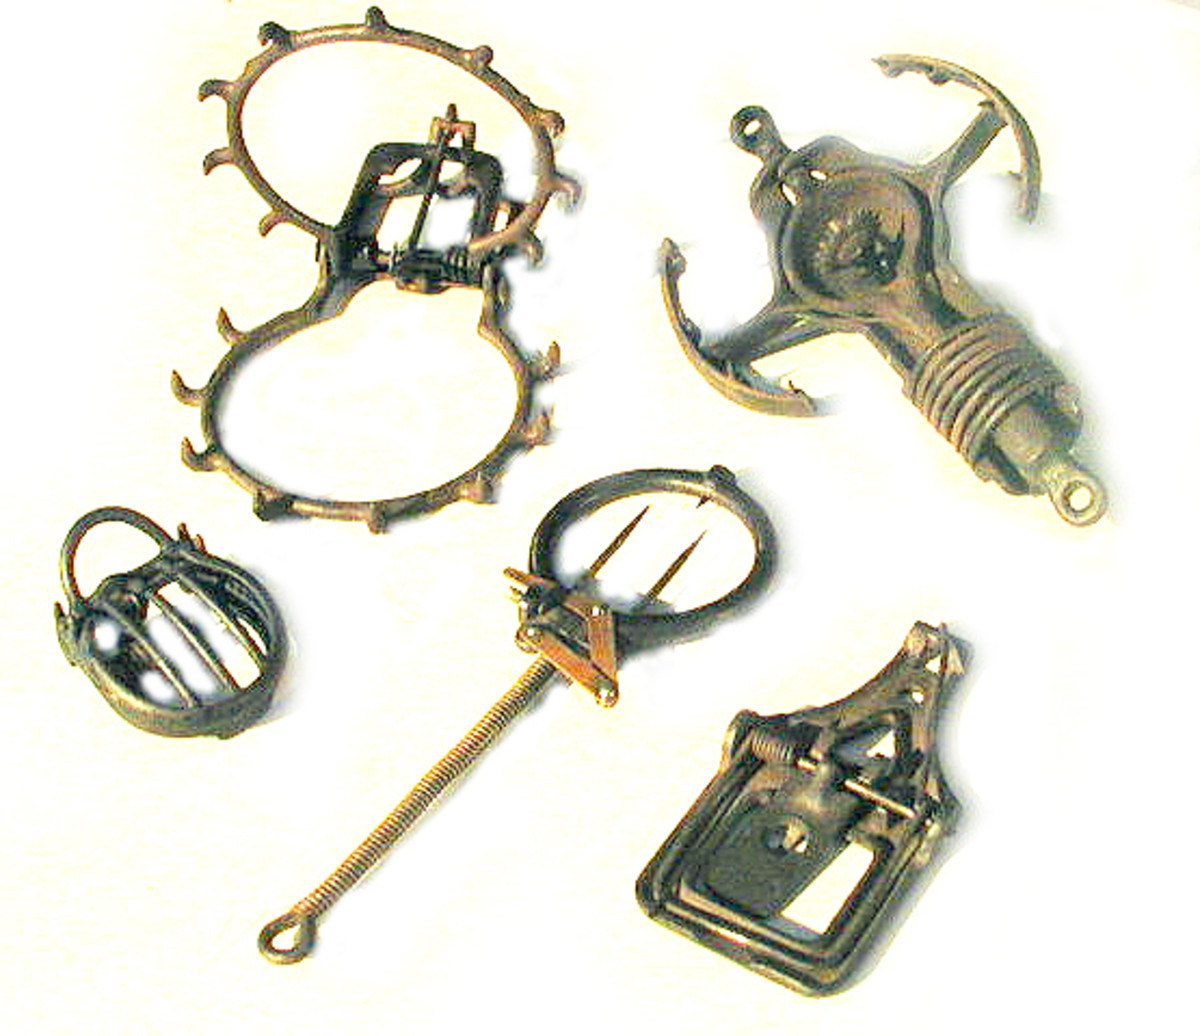 THE INVENTOR RECEIVED DIVINE GUIDANCE FROM THE GRAND INQUISITOR TORQUEMADA IN CREATING THESE INSTRUMENTS OF TORTURE.